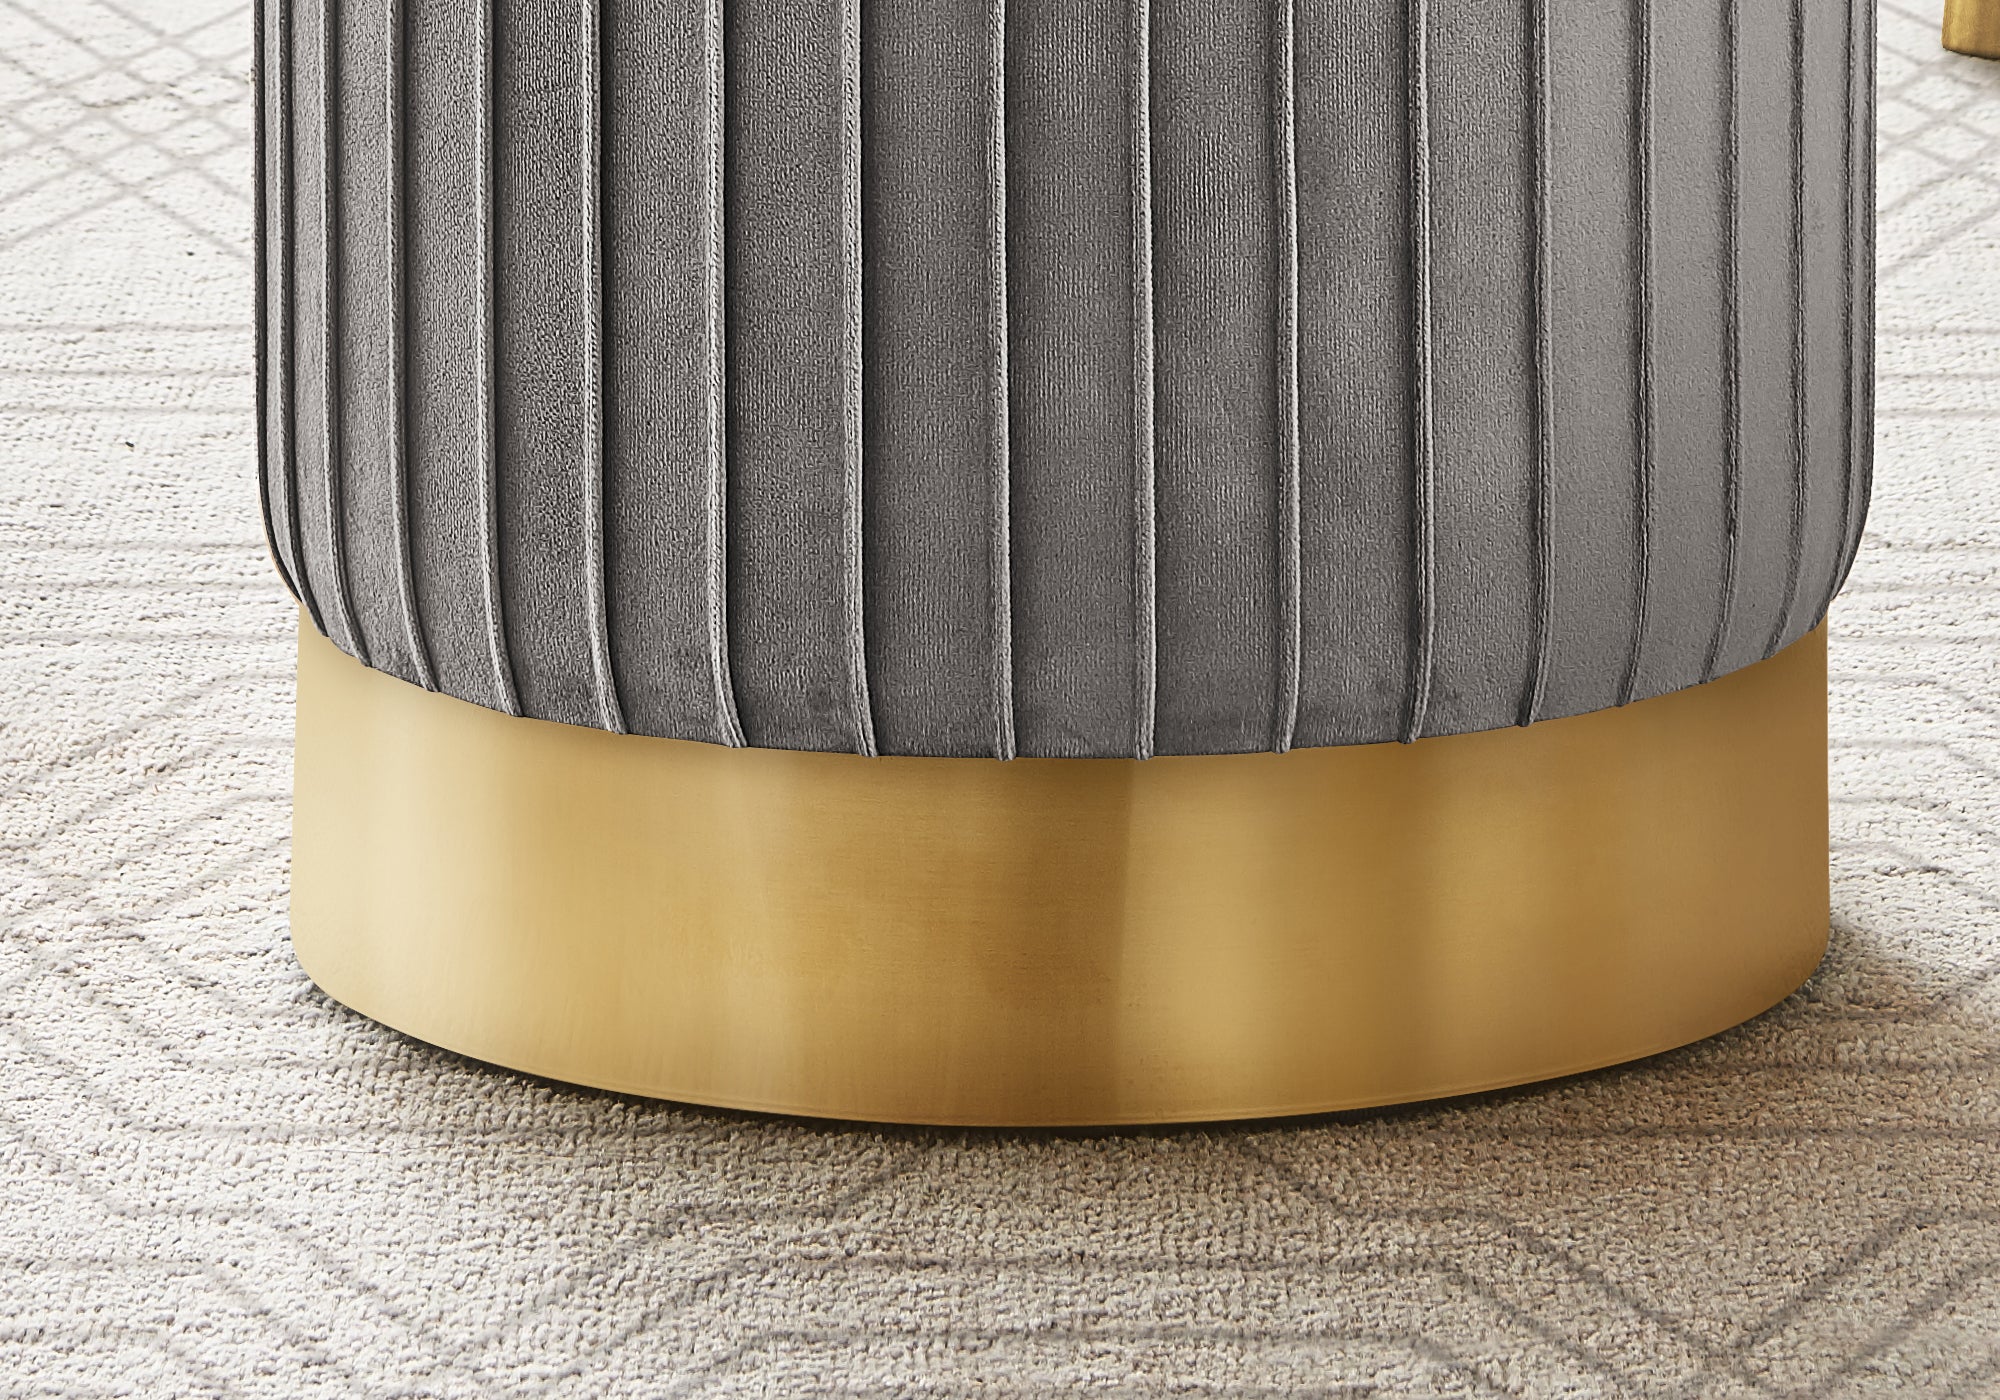 MN-319020    Ottoman, Pouf, Footrest, Foot Stool, 14" Round, Velvet Fabric, Metal Base, Grey, Gold, Contemporary, Glam, Modern